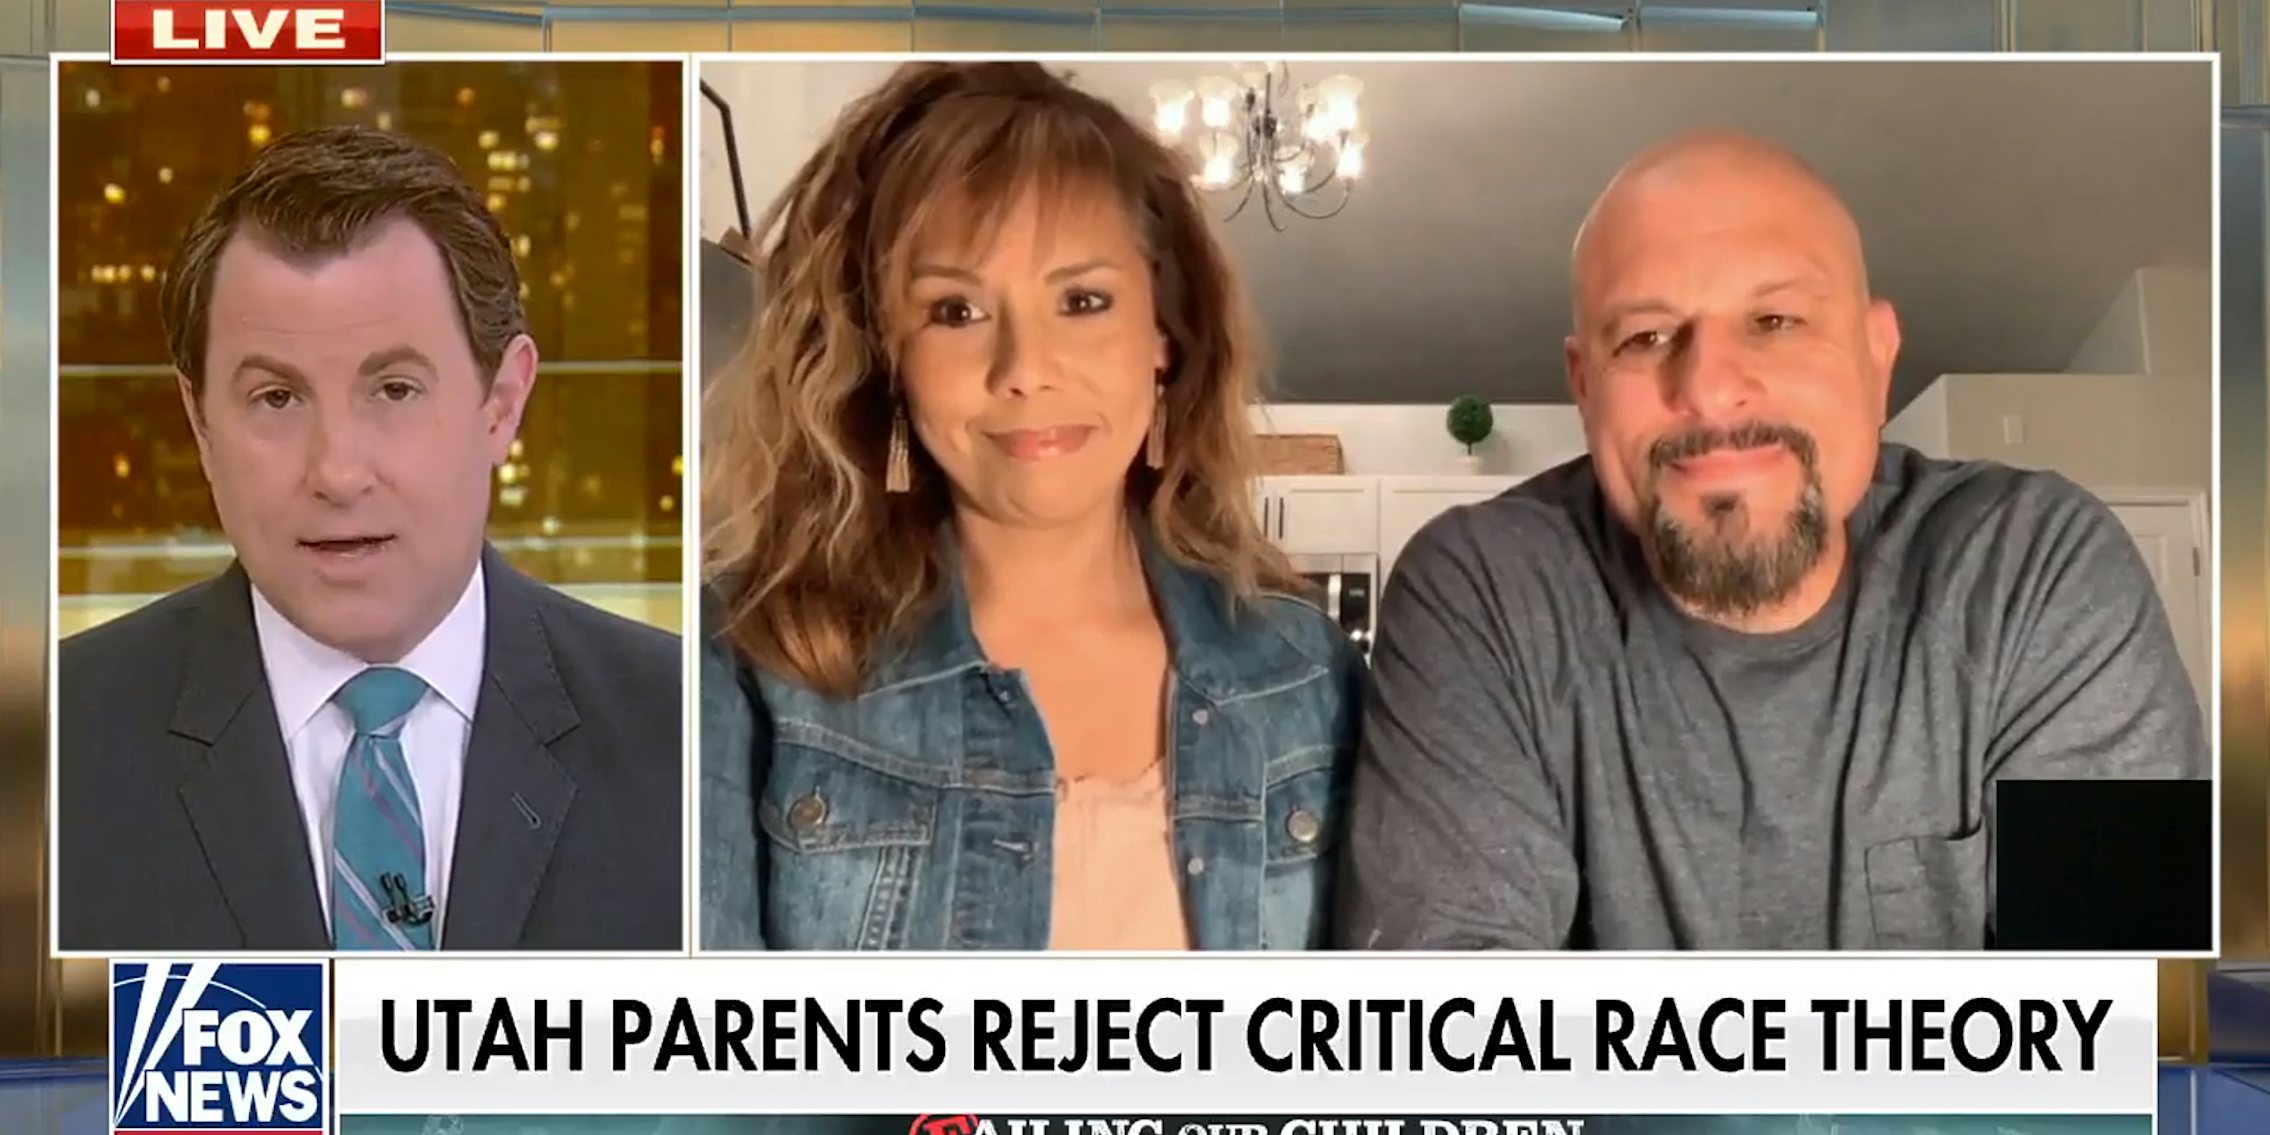 Fox News host and a couple in their house with banner 'Utah parents reject critical race theory'